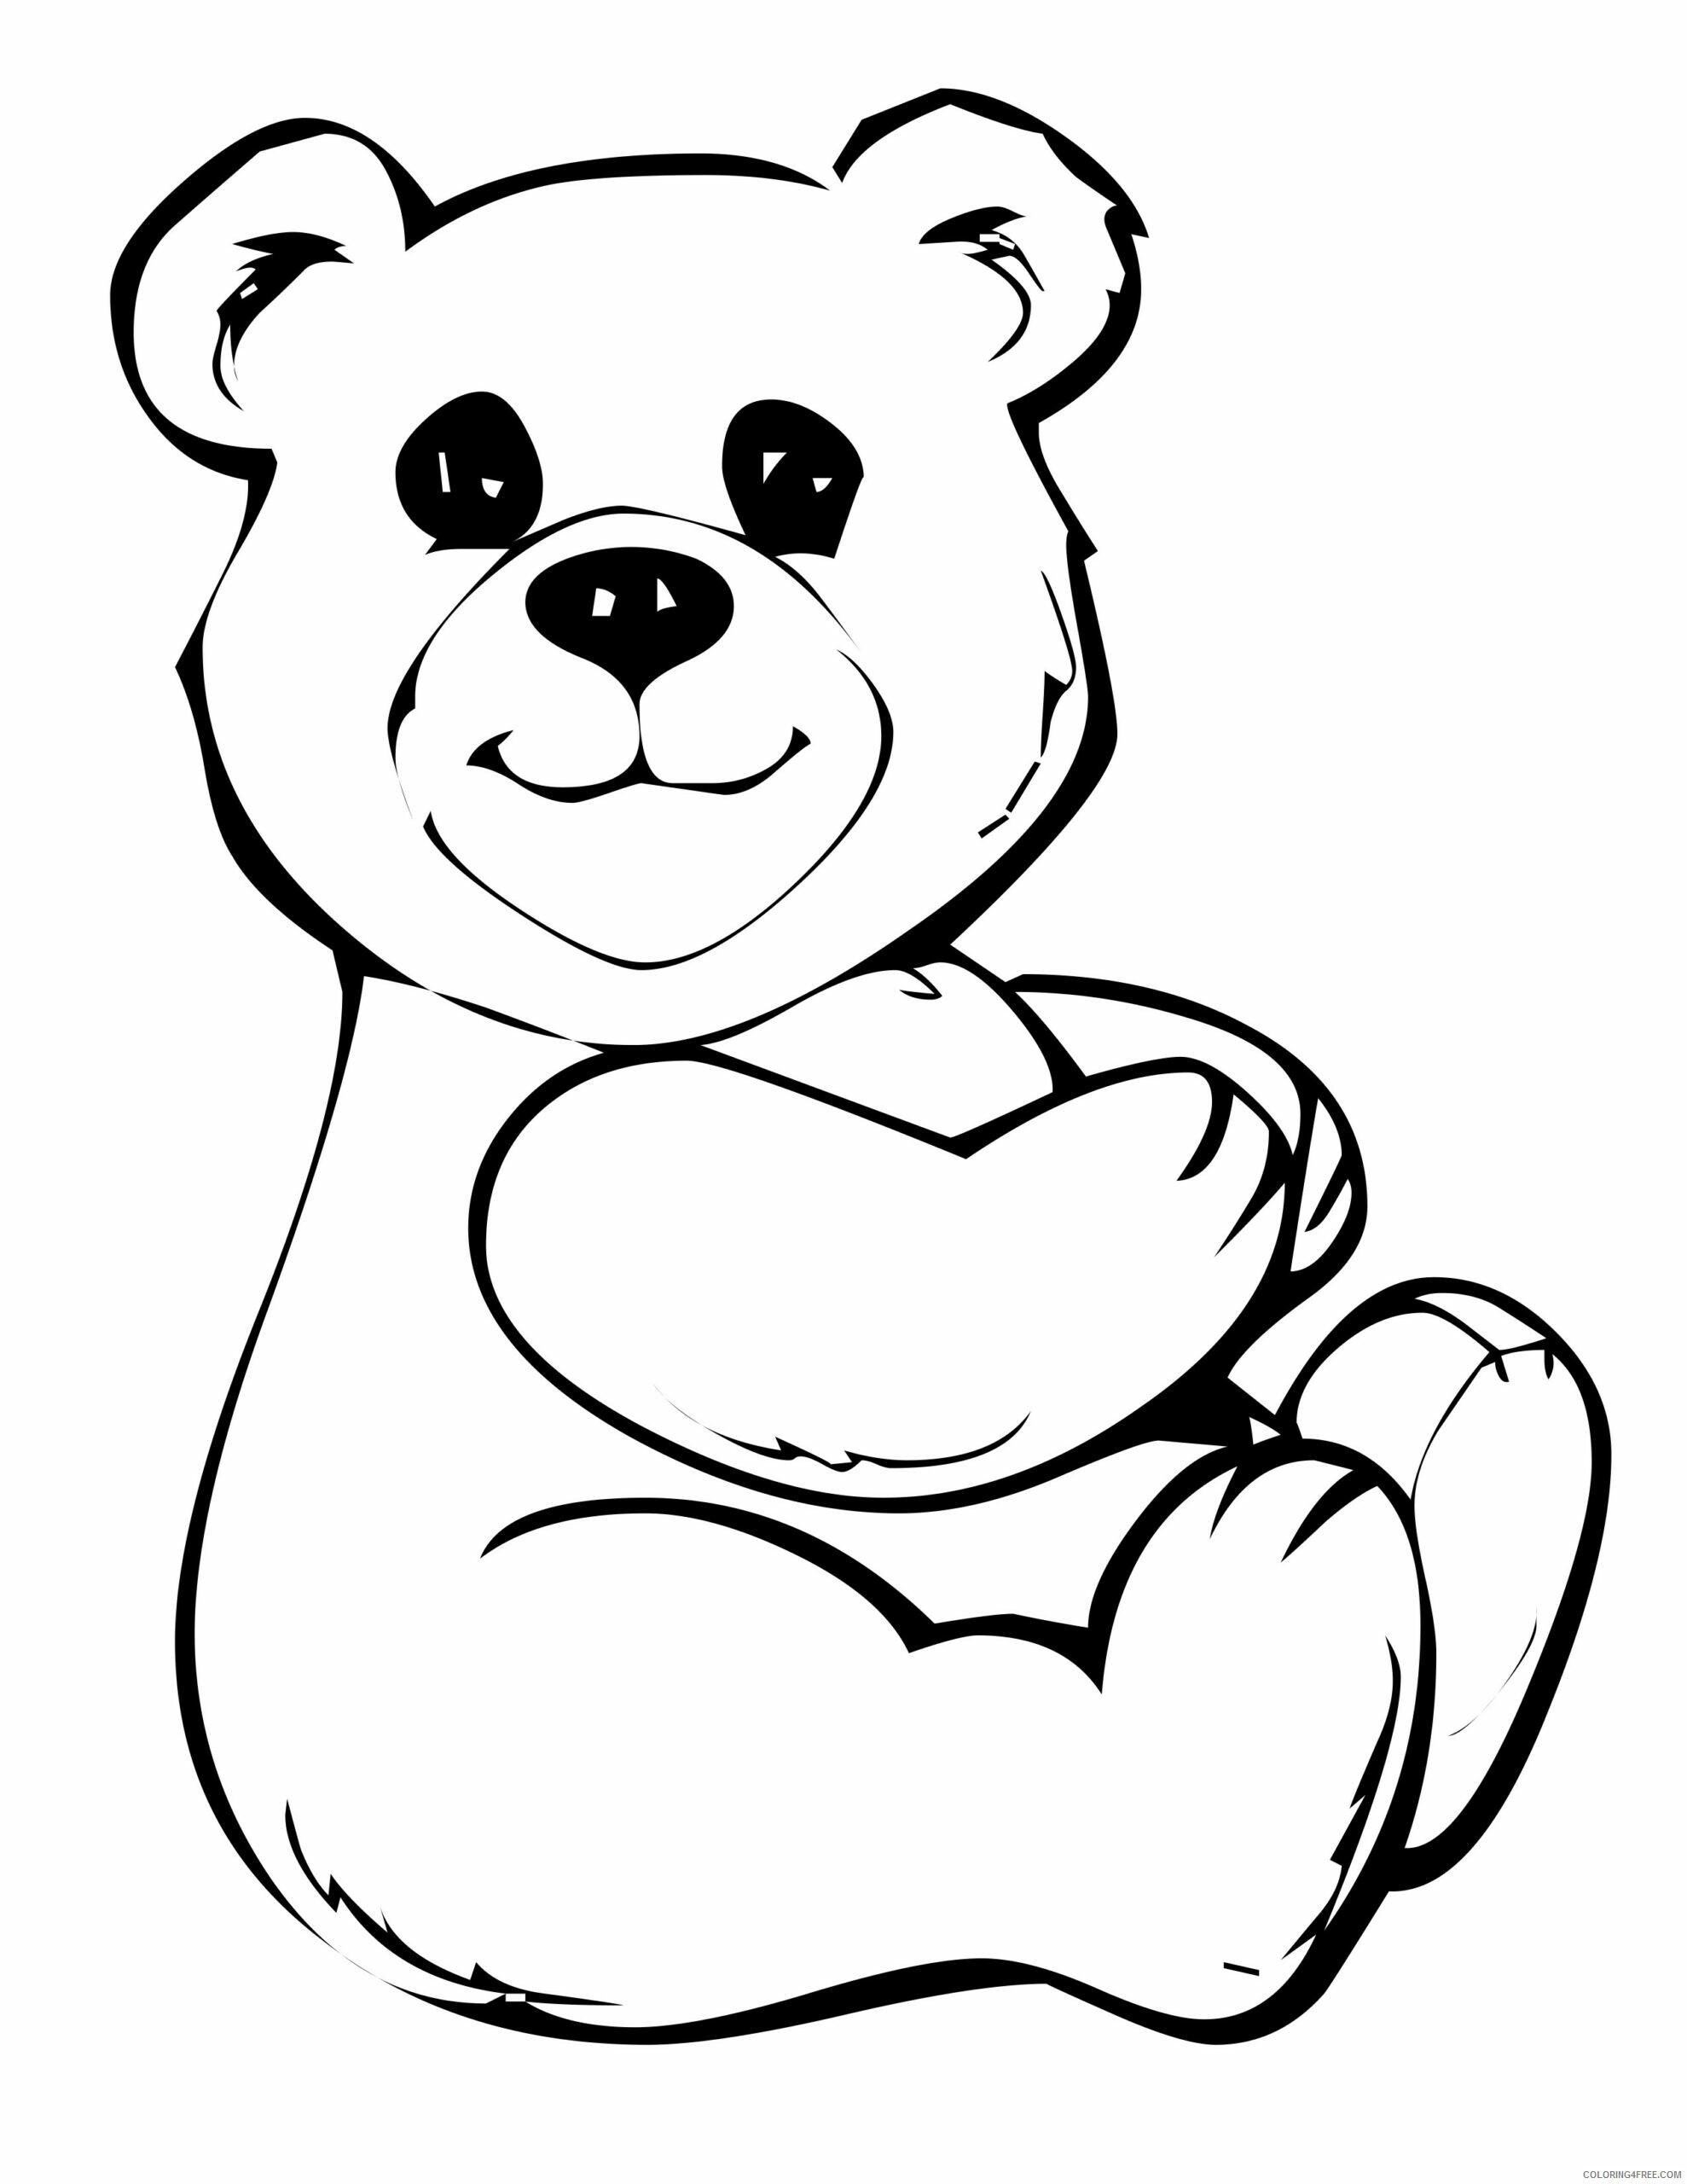 Bear Coloring Pages Animal Printable Sheets Teddy Bears 2021 0325 Coloring4free